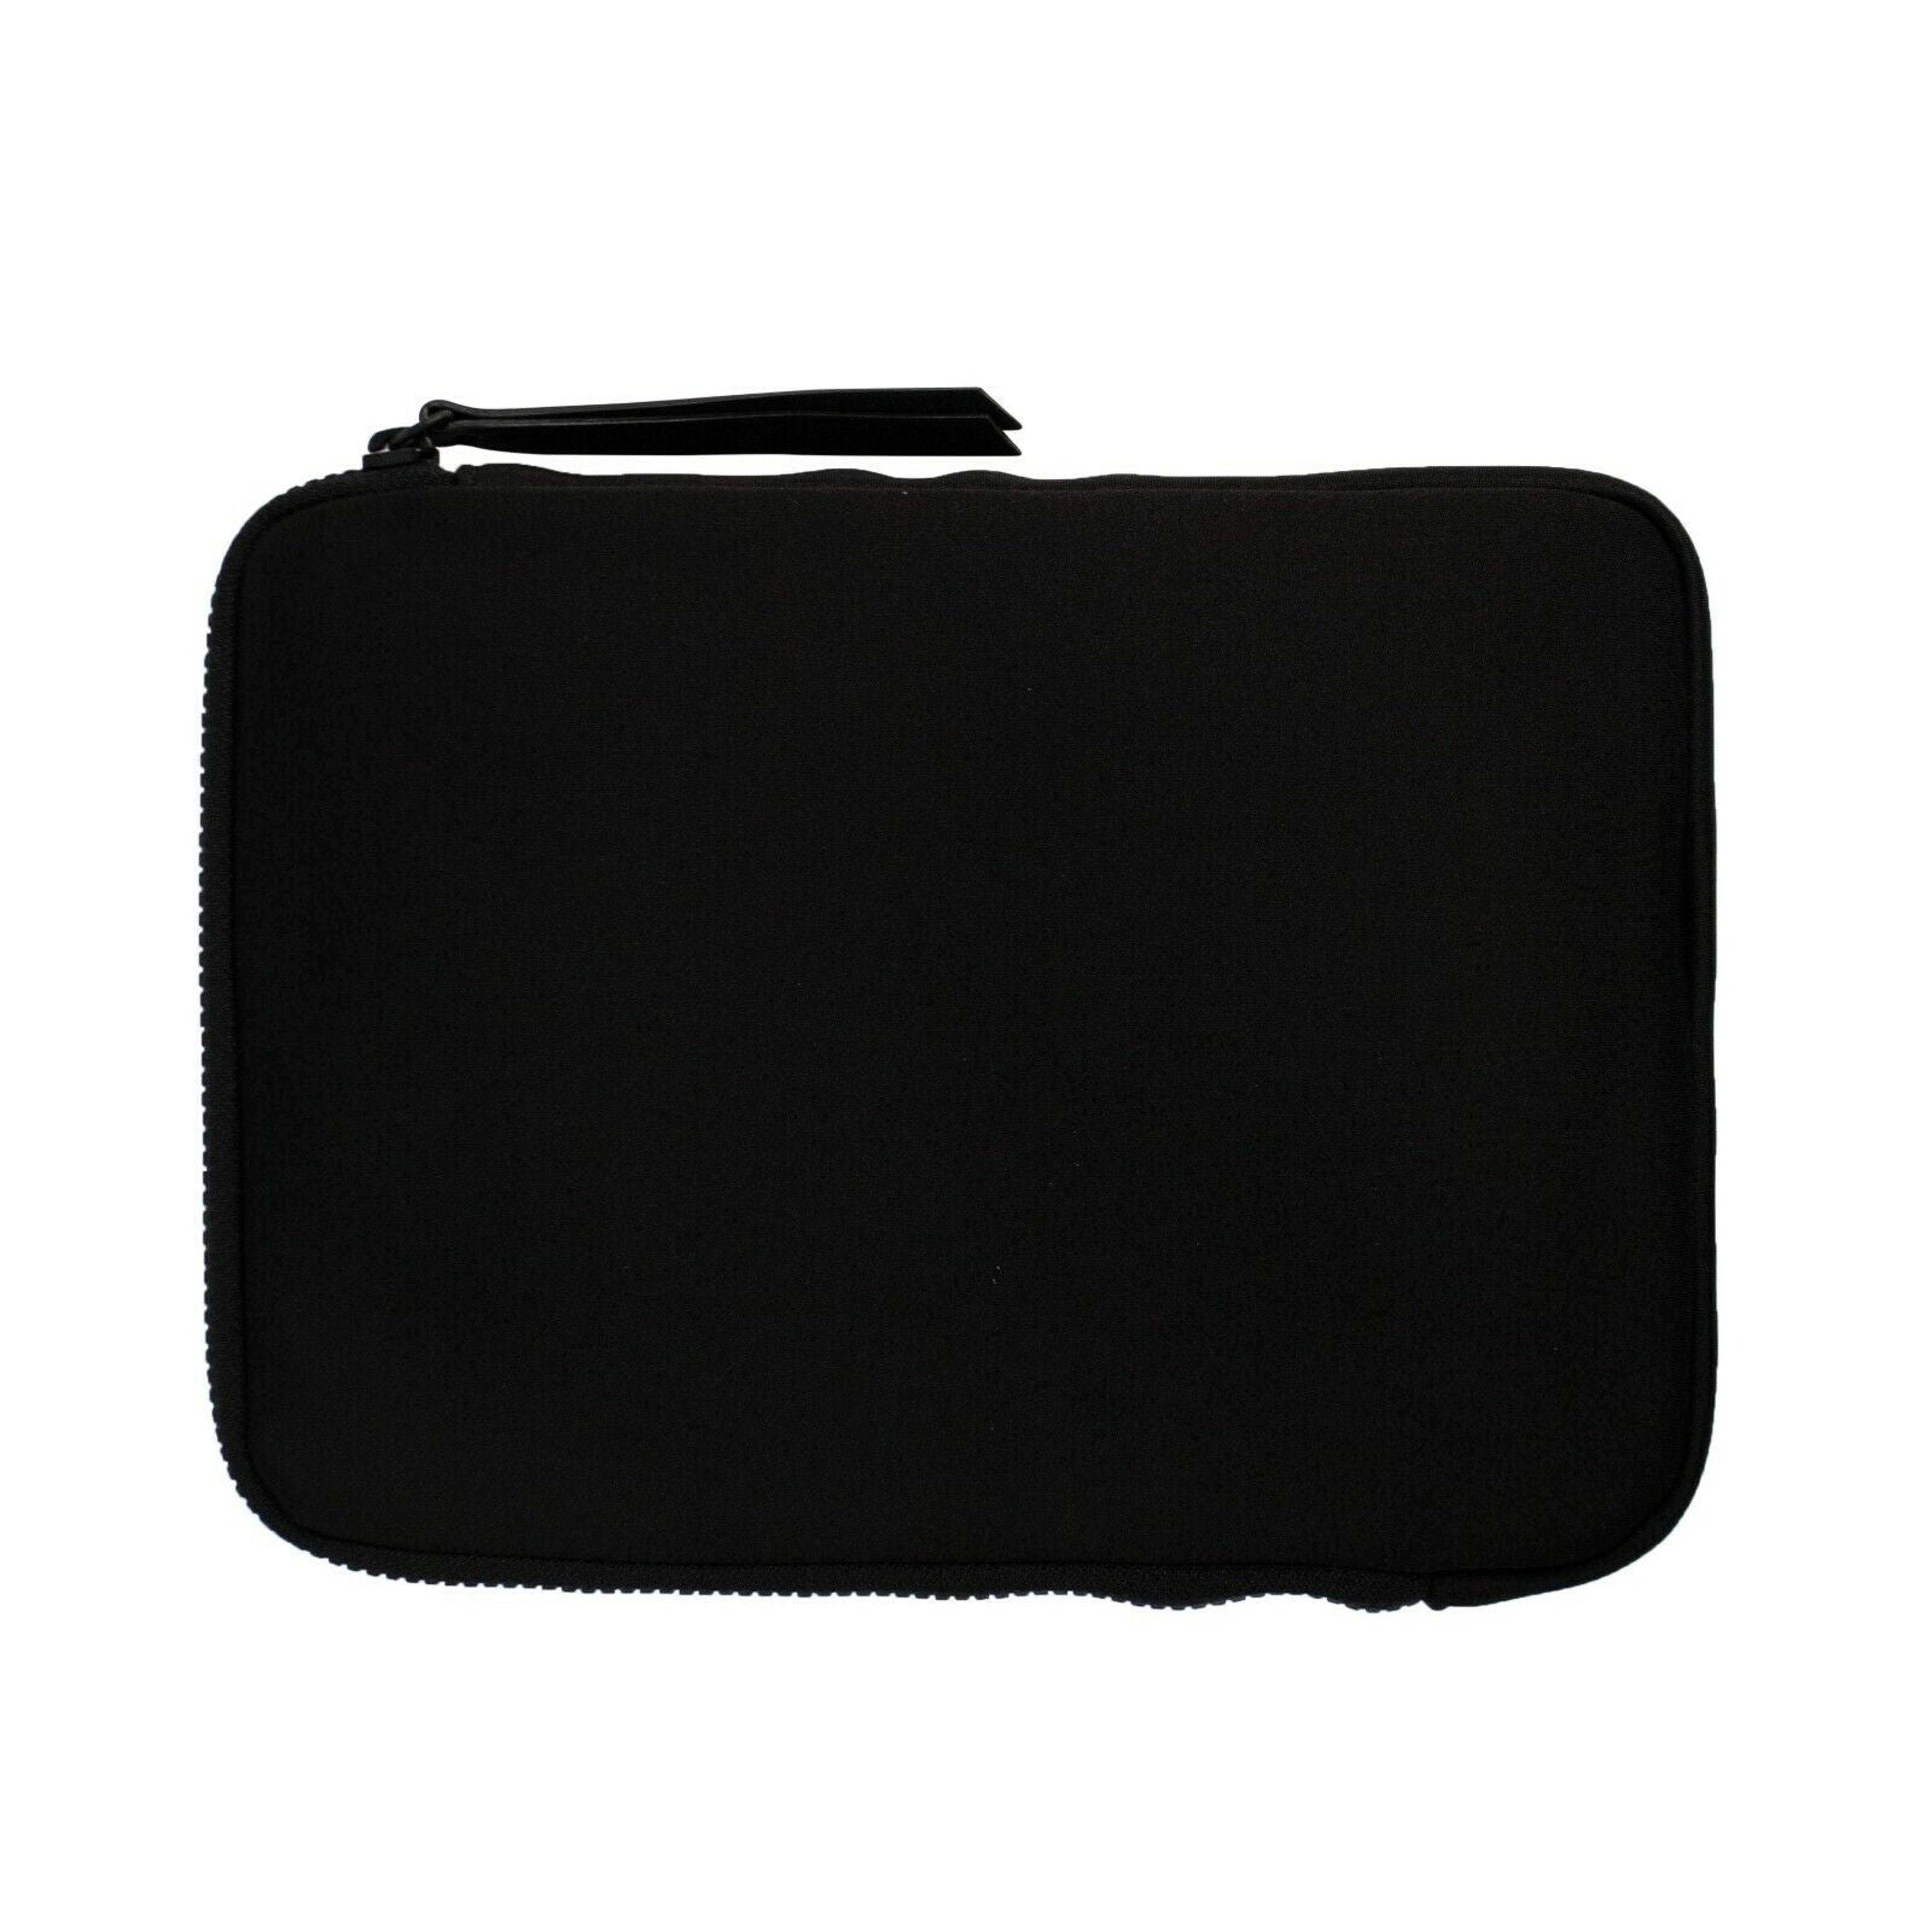 Alternate View 1 of Black Logo Patch IPad Case Pouch